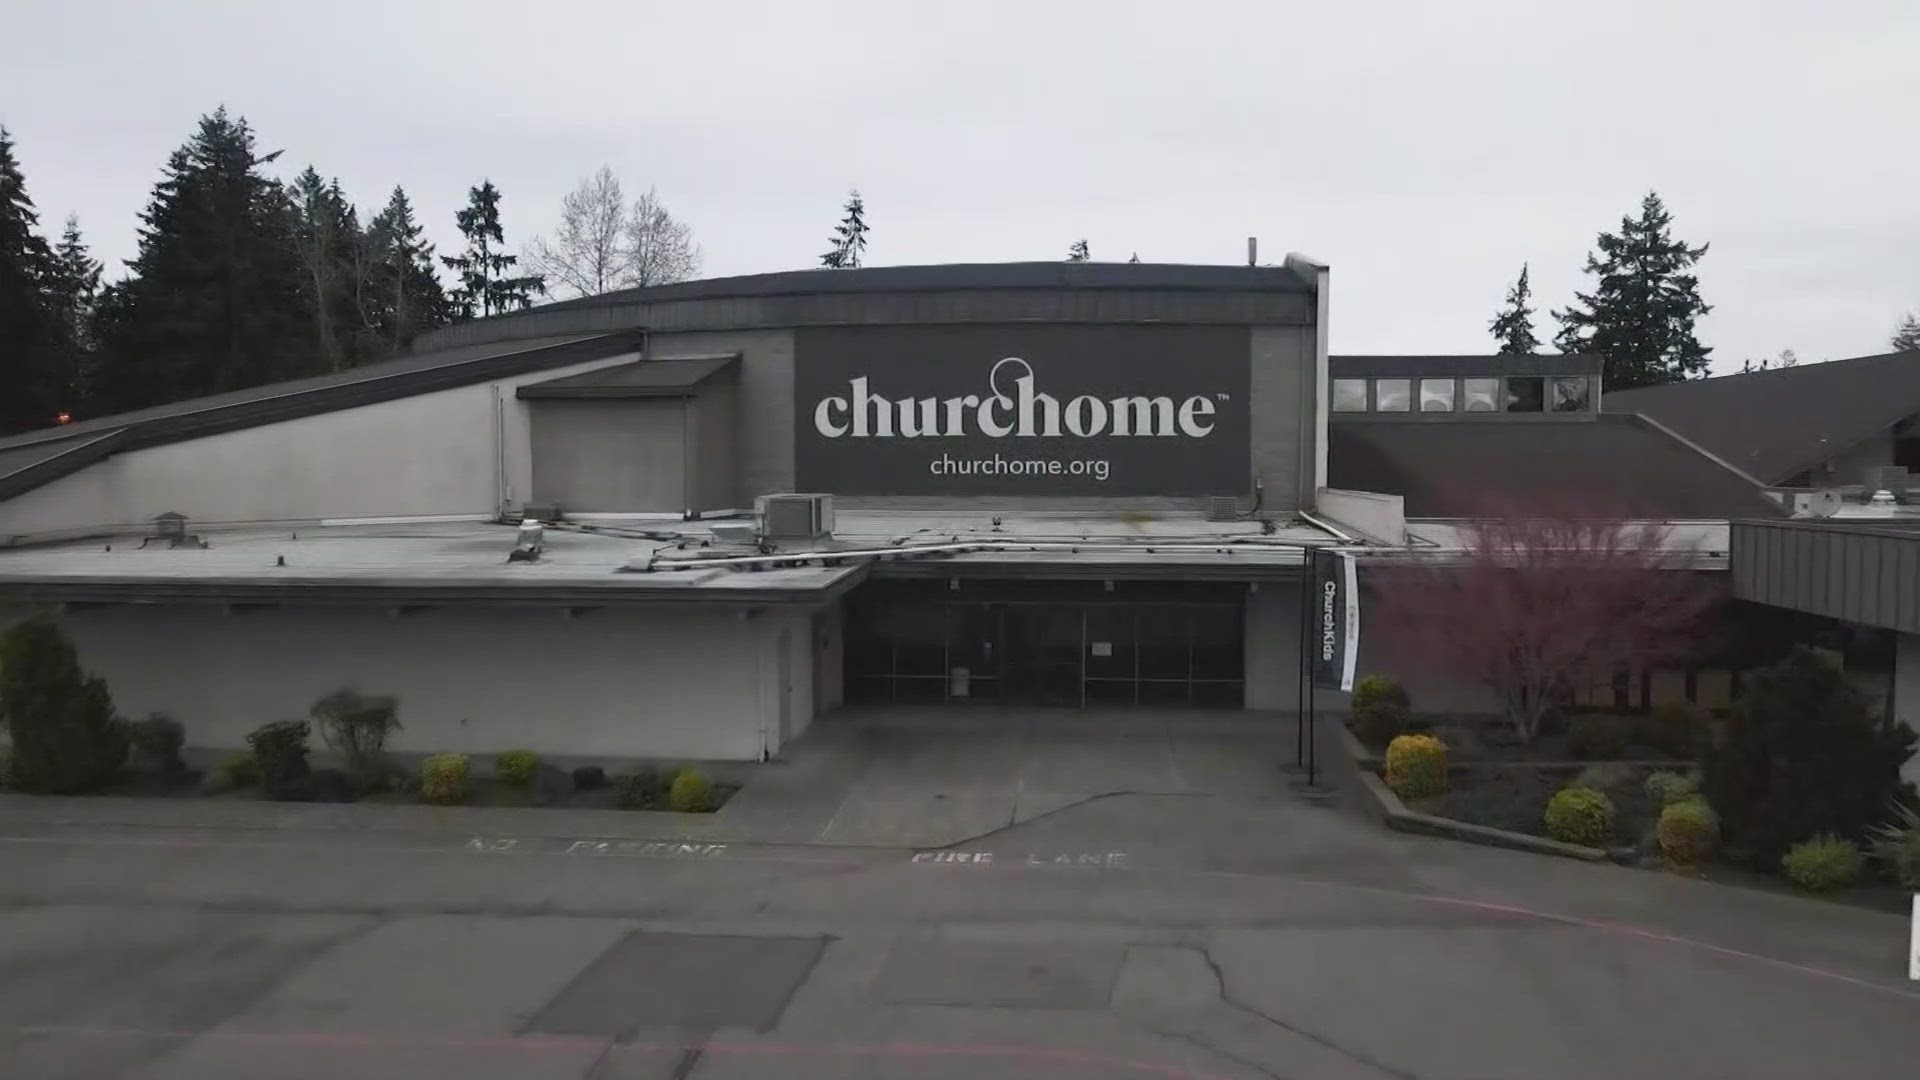 Churchome in Kirkland is being sued by an employee who alleges she was threatened with termination when she couldn't afford to tithe, or donate, to the megachurch.